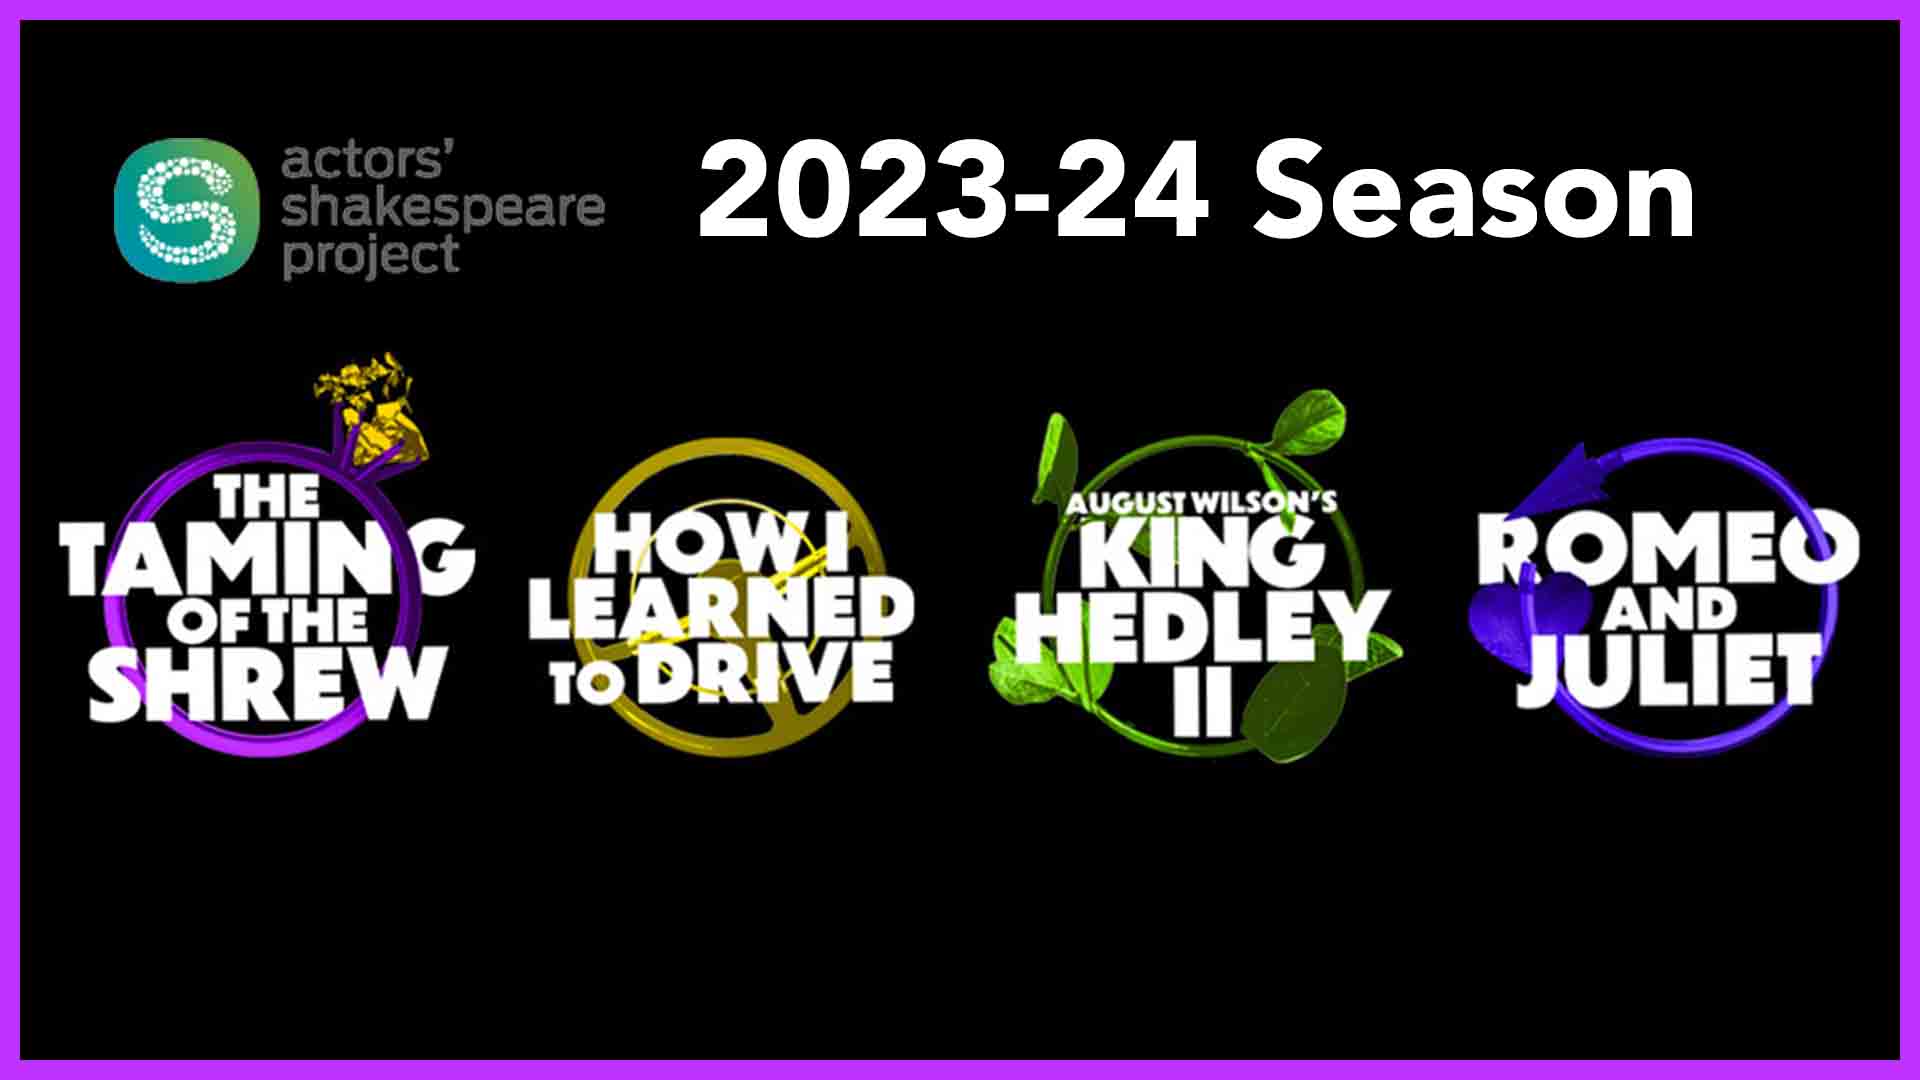 Actors’ Shakespeare Project is proud to announce its 2023-24 Season!